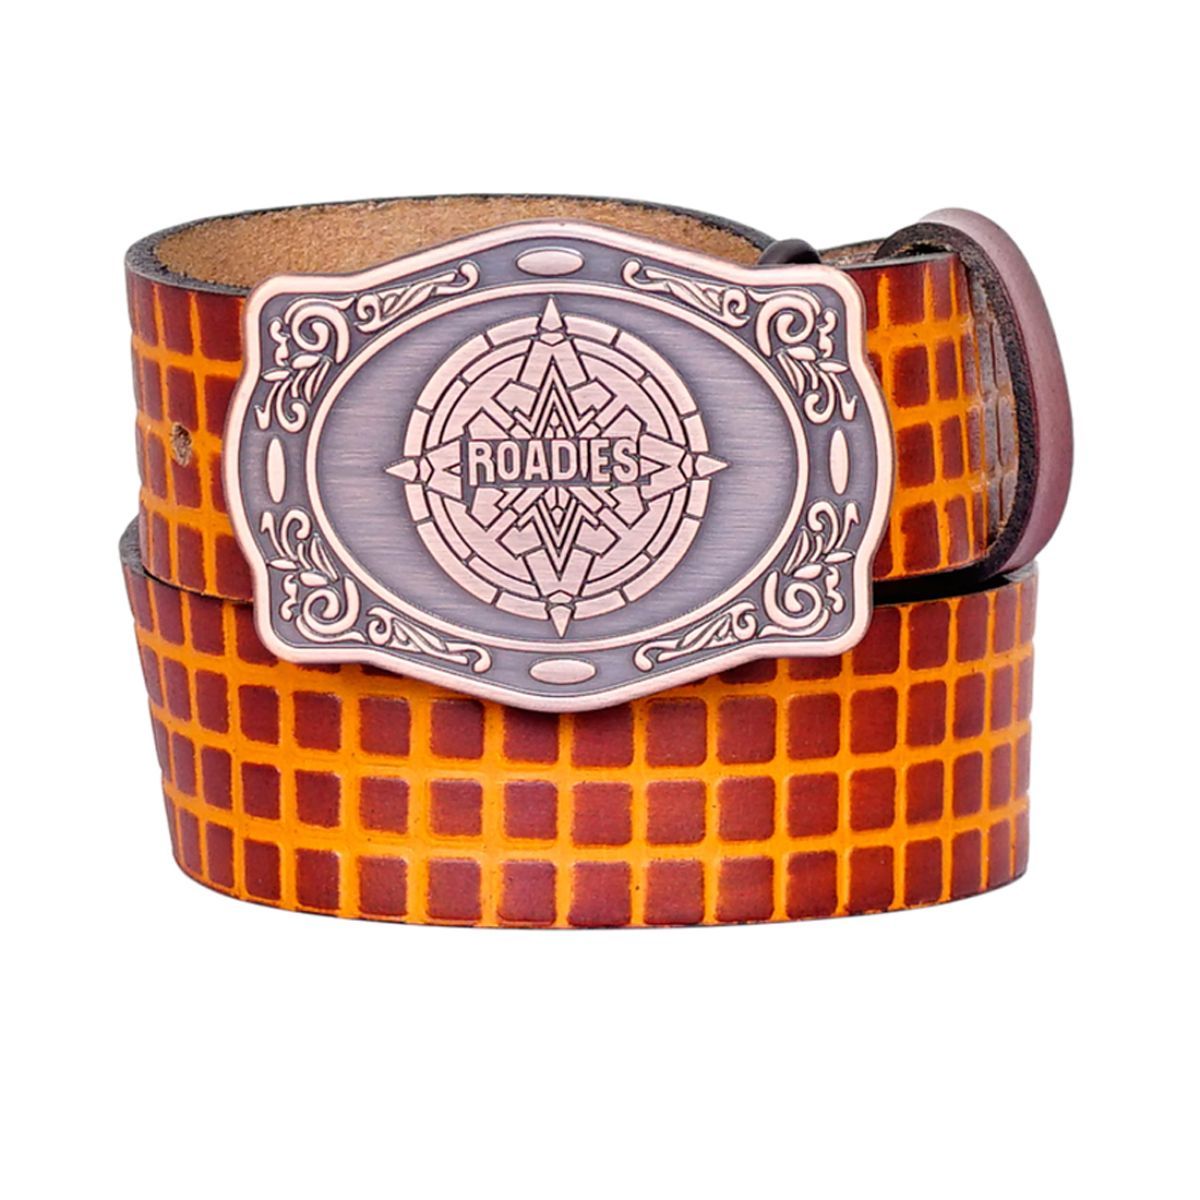 Justanned Roadies By Brown-Yellow Check Men'S Leather Belt (30)